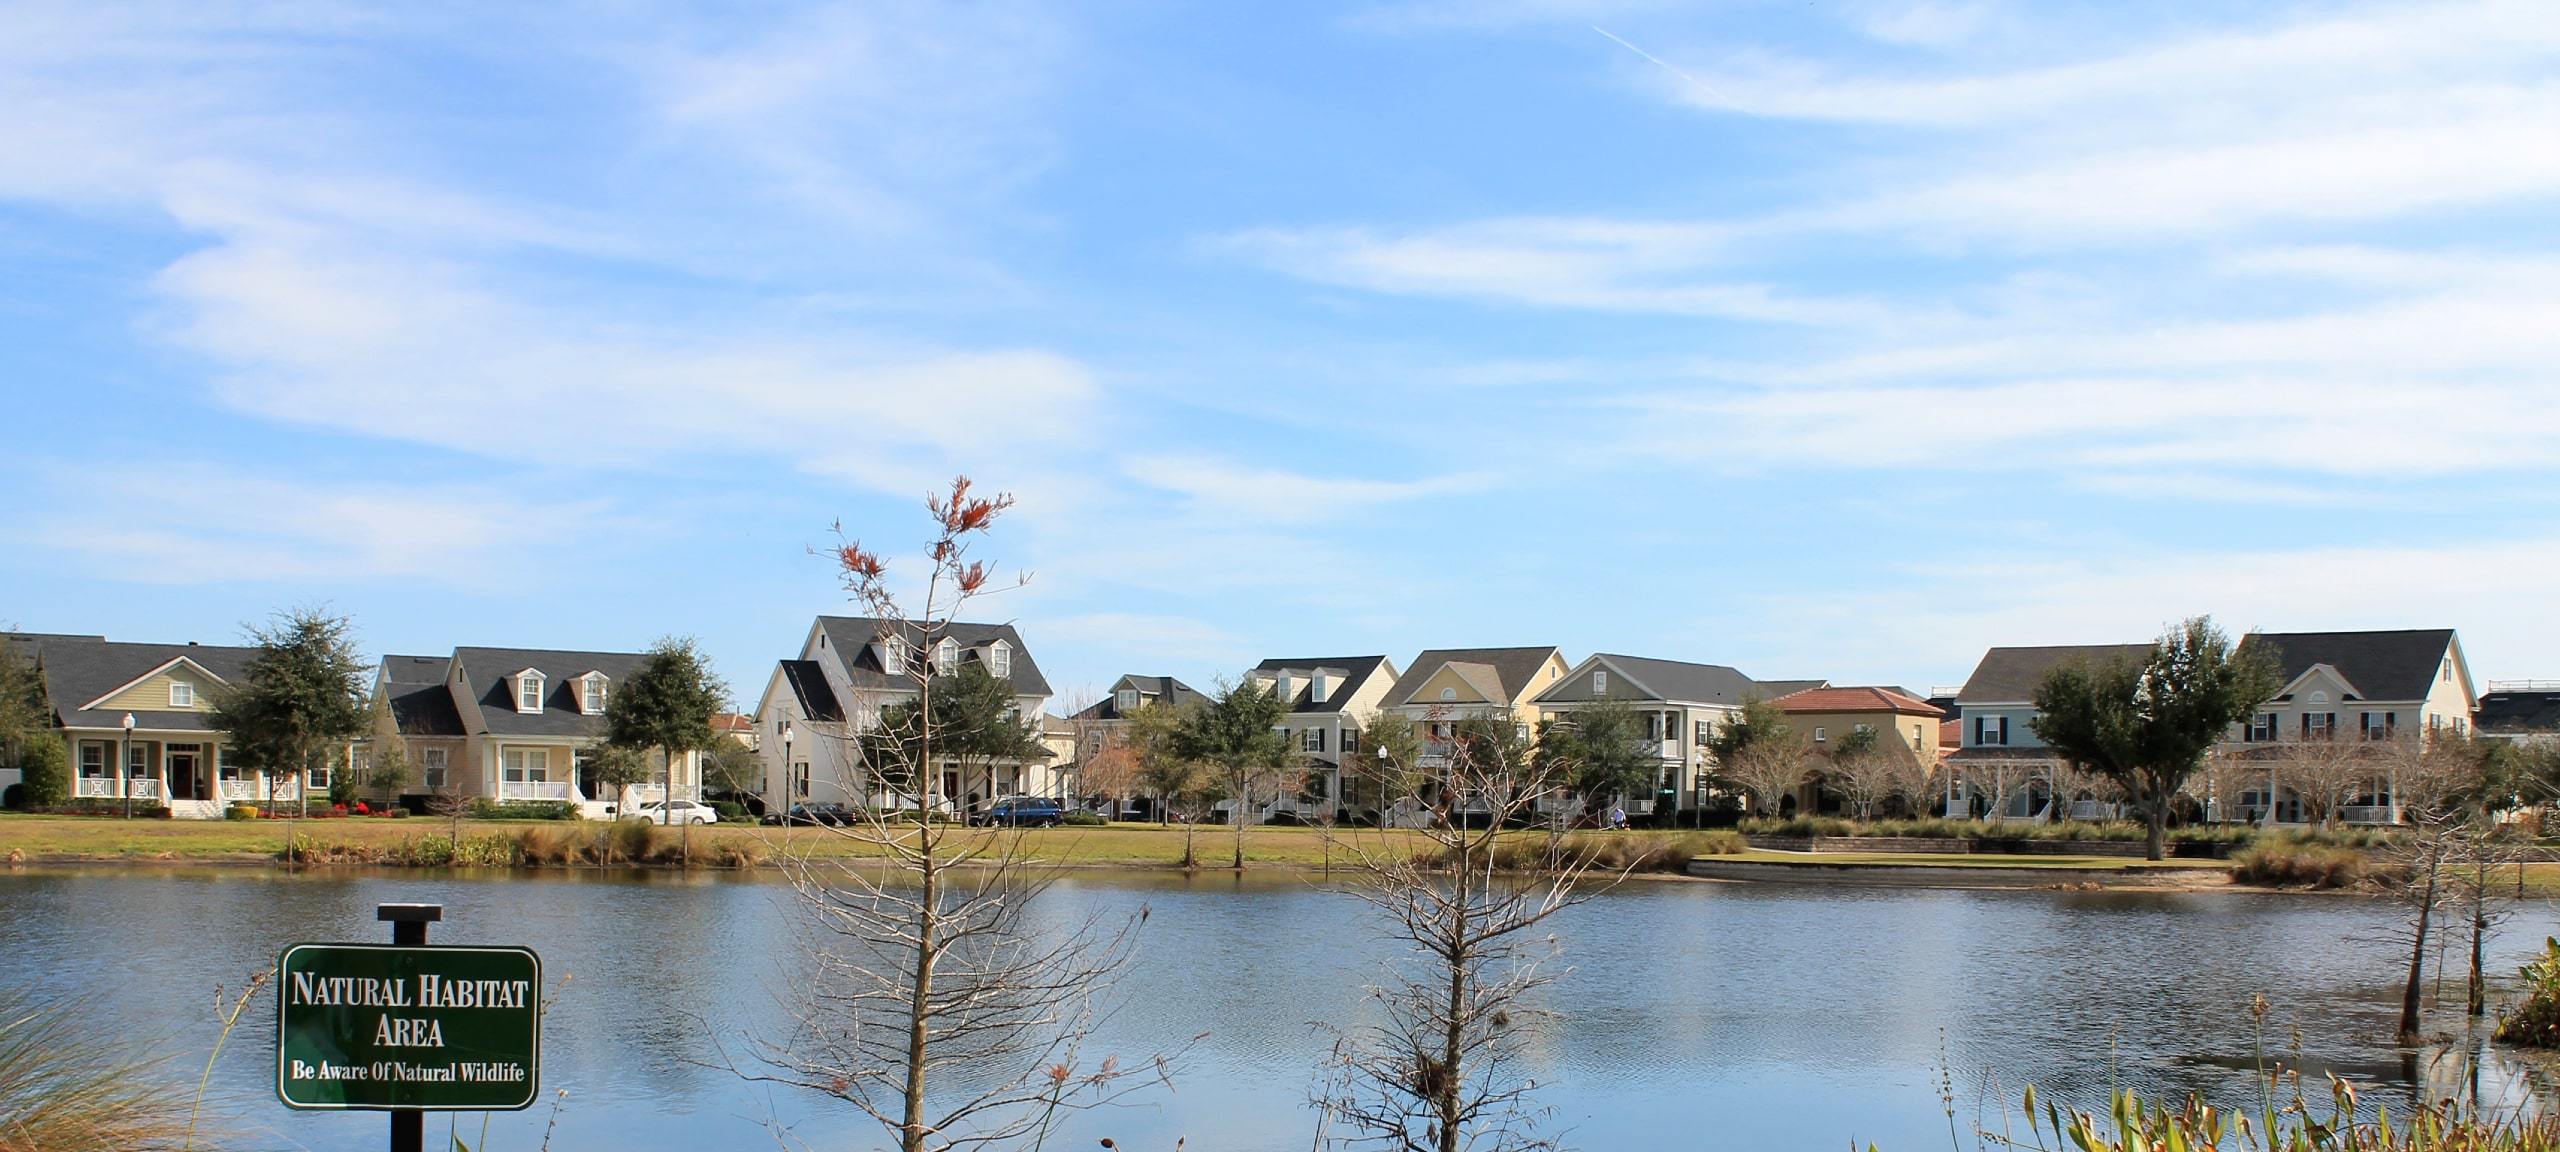 A quaint line of single-family homes as seen from a park in Orlando, FL.